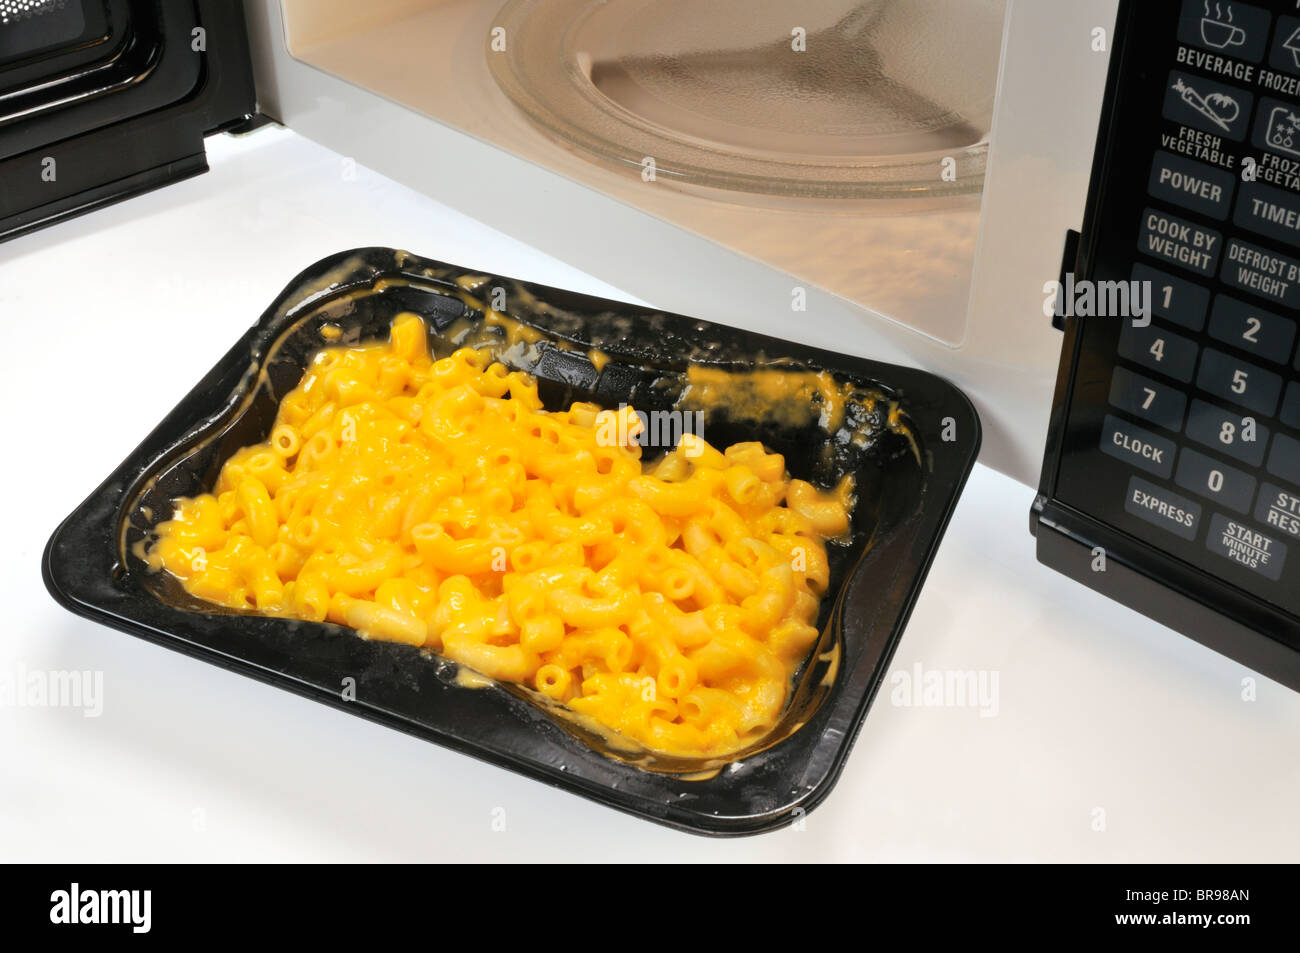 Tray of cooked macaroni pasta and cheese in front of microwave with door open Stock Photo